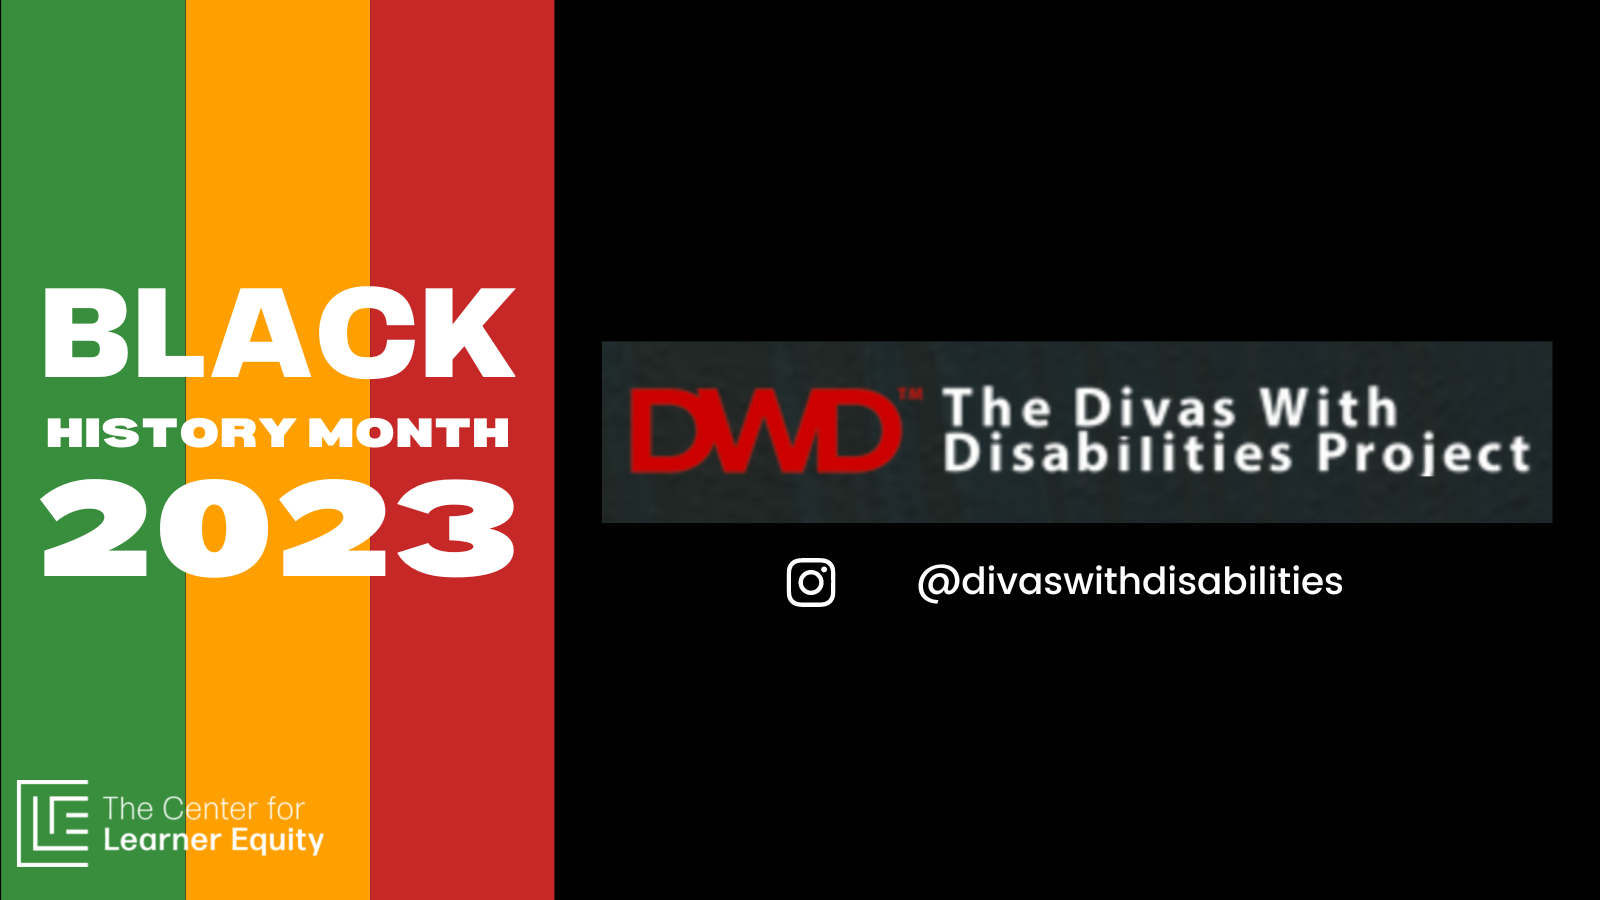 DWD in red, The Divas with Disabilities project in white on a black background.